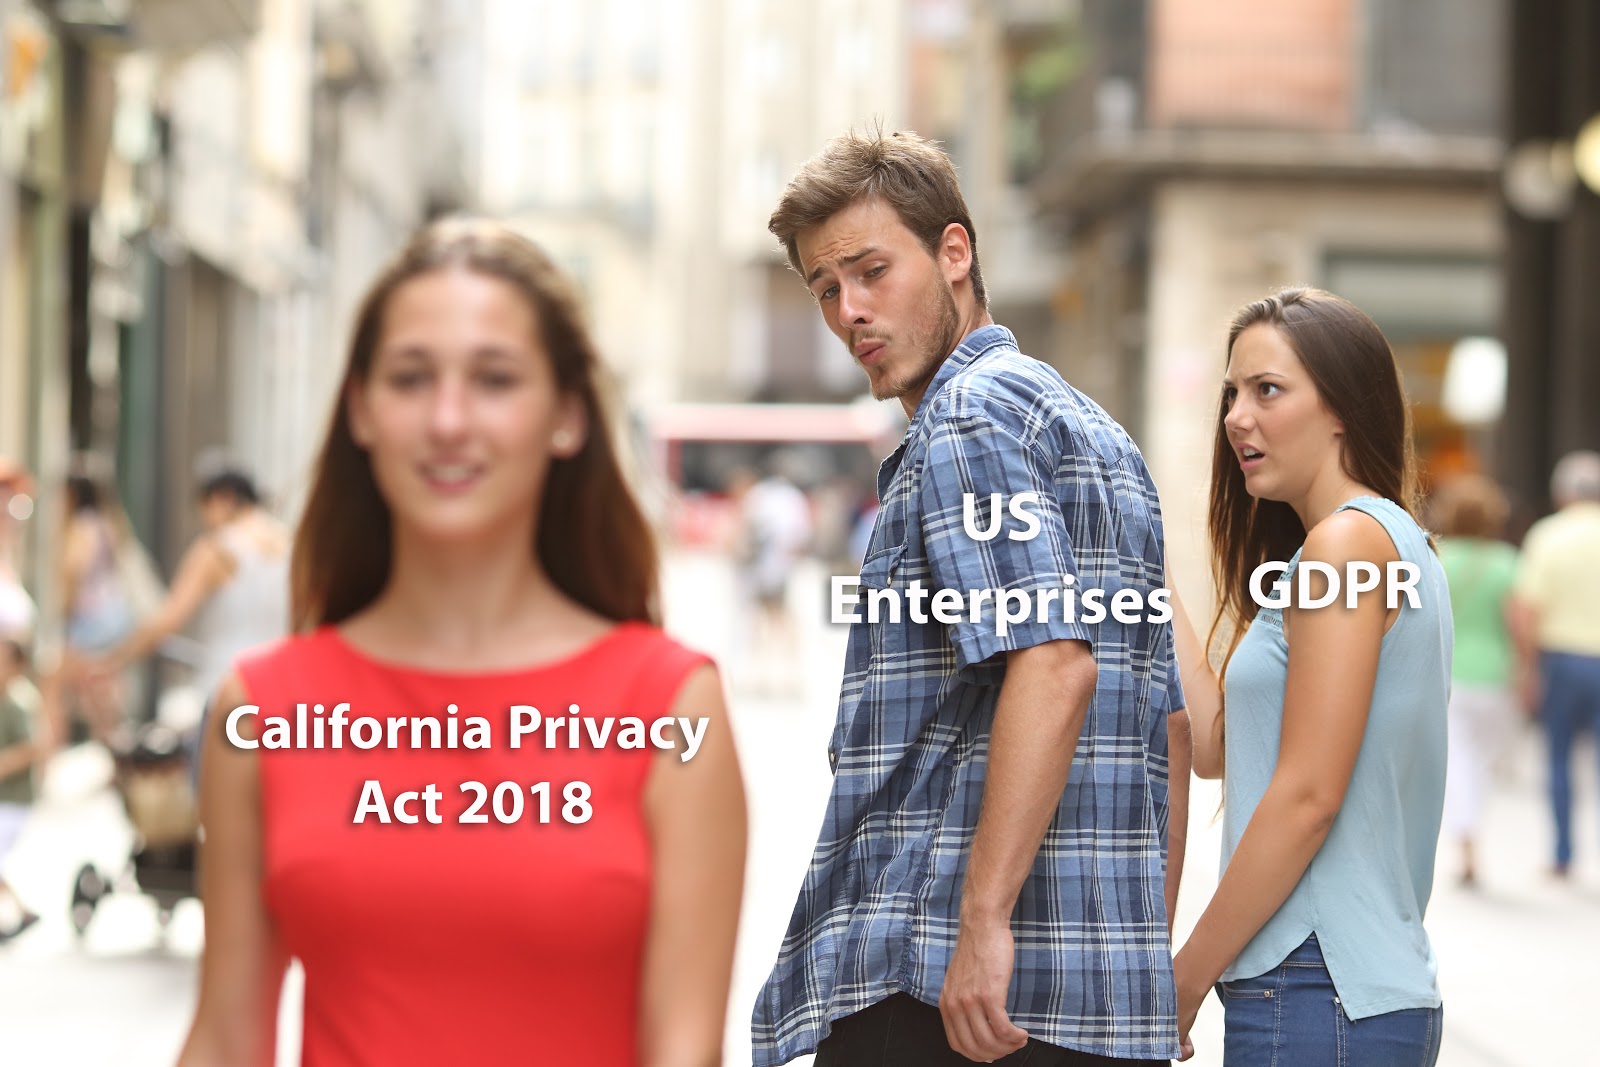 ccpa-the-new-gdpr-funny